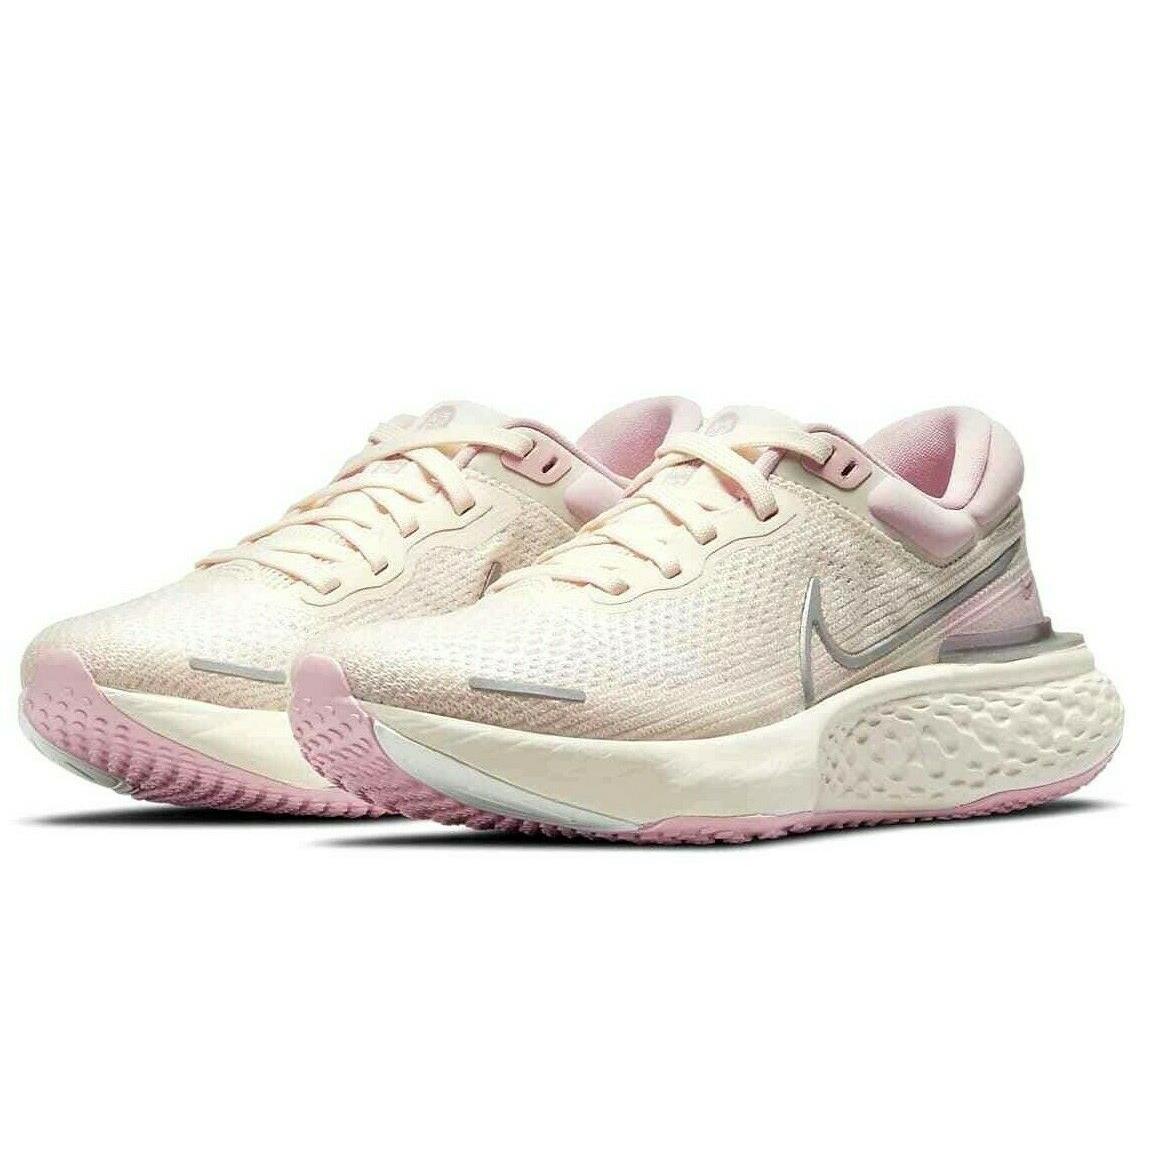 Nike Zoomx Invincible Run FK Womens Size 9 Sneakers Shoes CT2229 800 Guava Ice